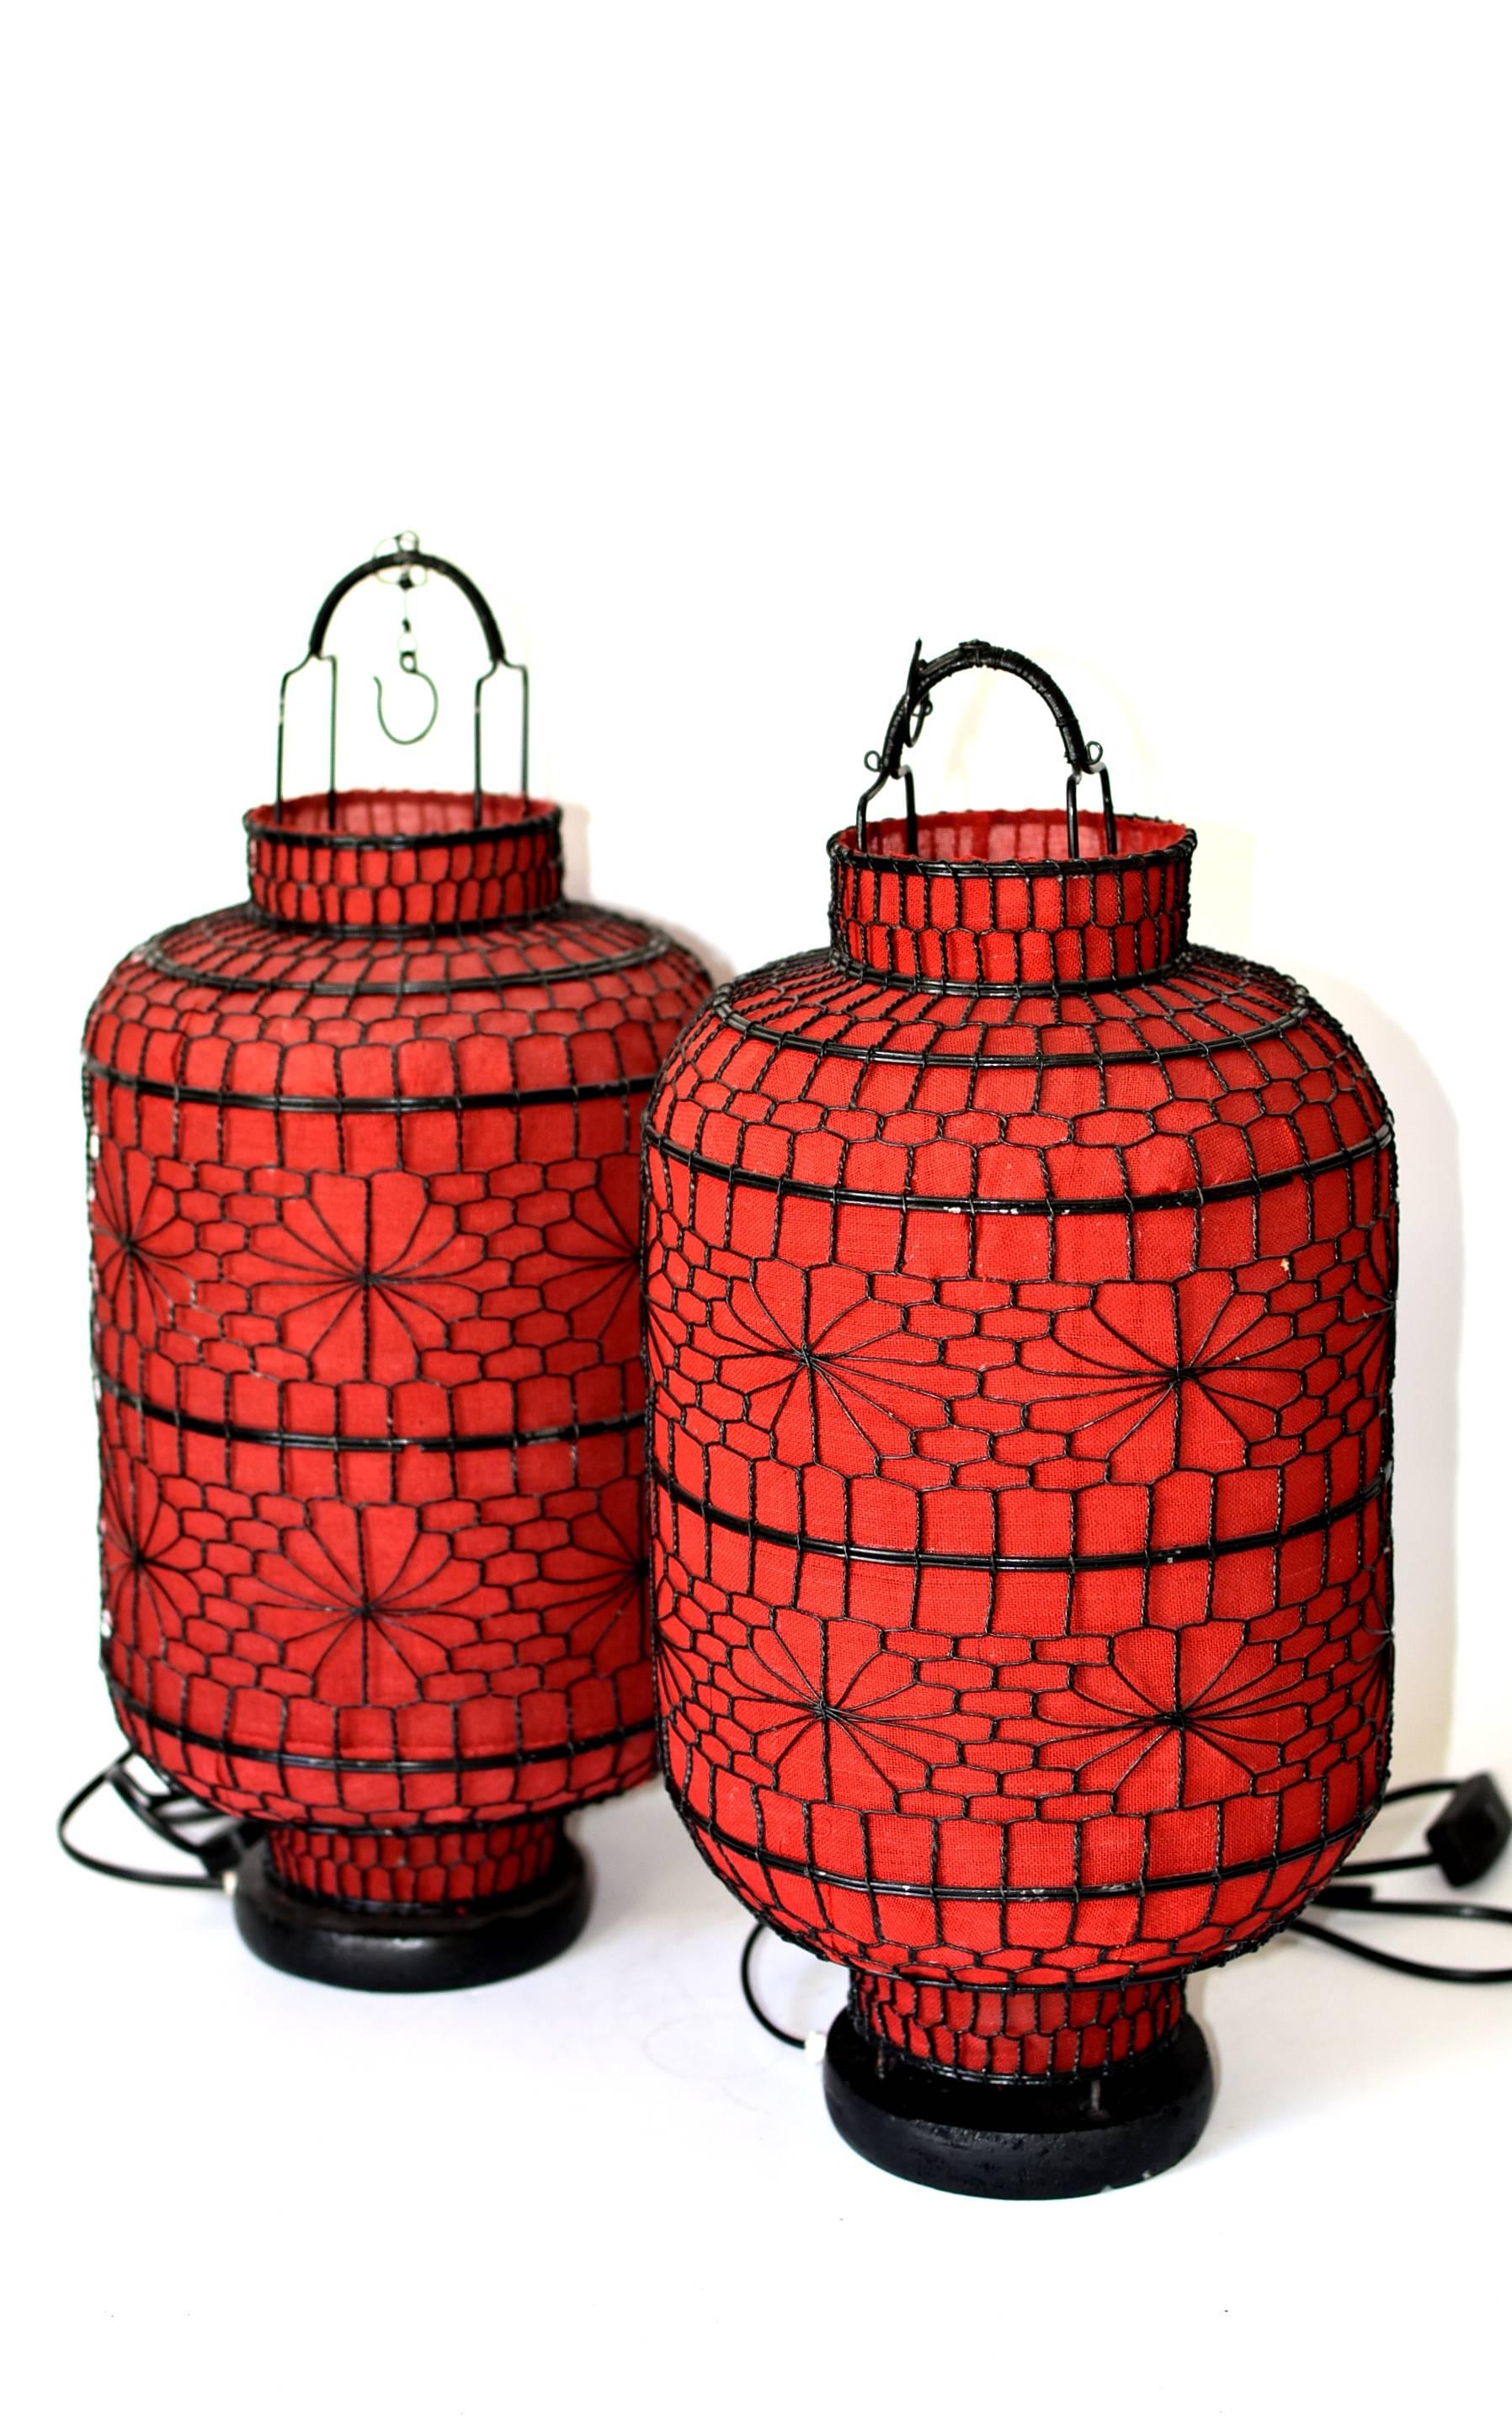 Beautiful handmade, red linen lined, antique style Chinese traditional lanterns.

These lanterns are not your run of the mill Chinatown ones. These are meticulously handcrafted in the old fashioned way, which is a dying art that is scarcely